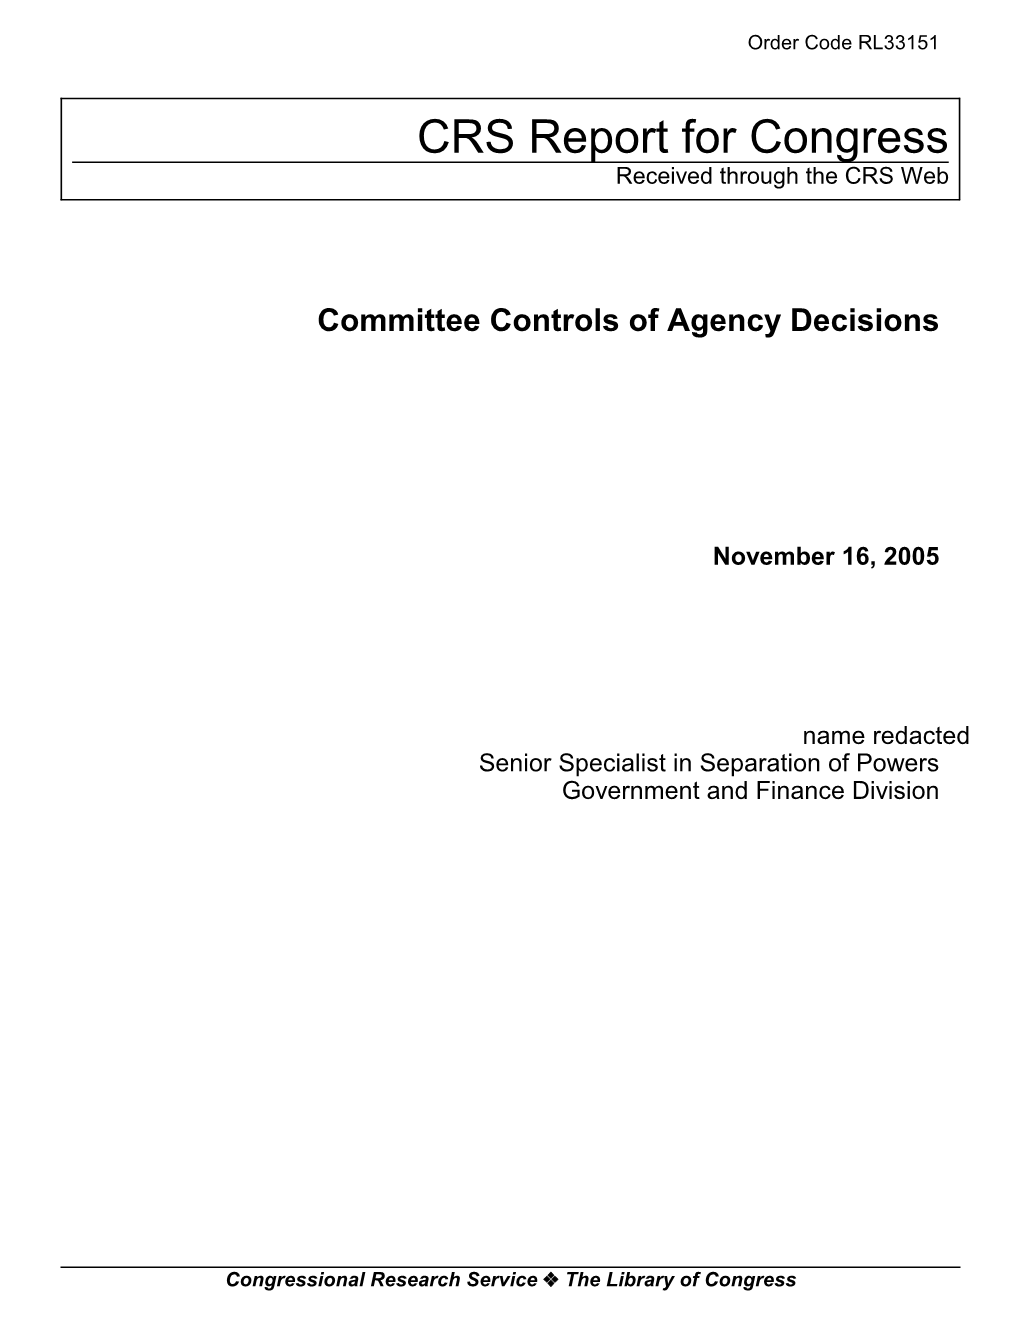 Committee Controls of Agency Decisions